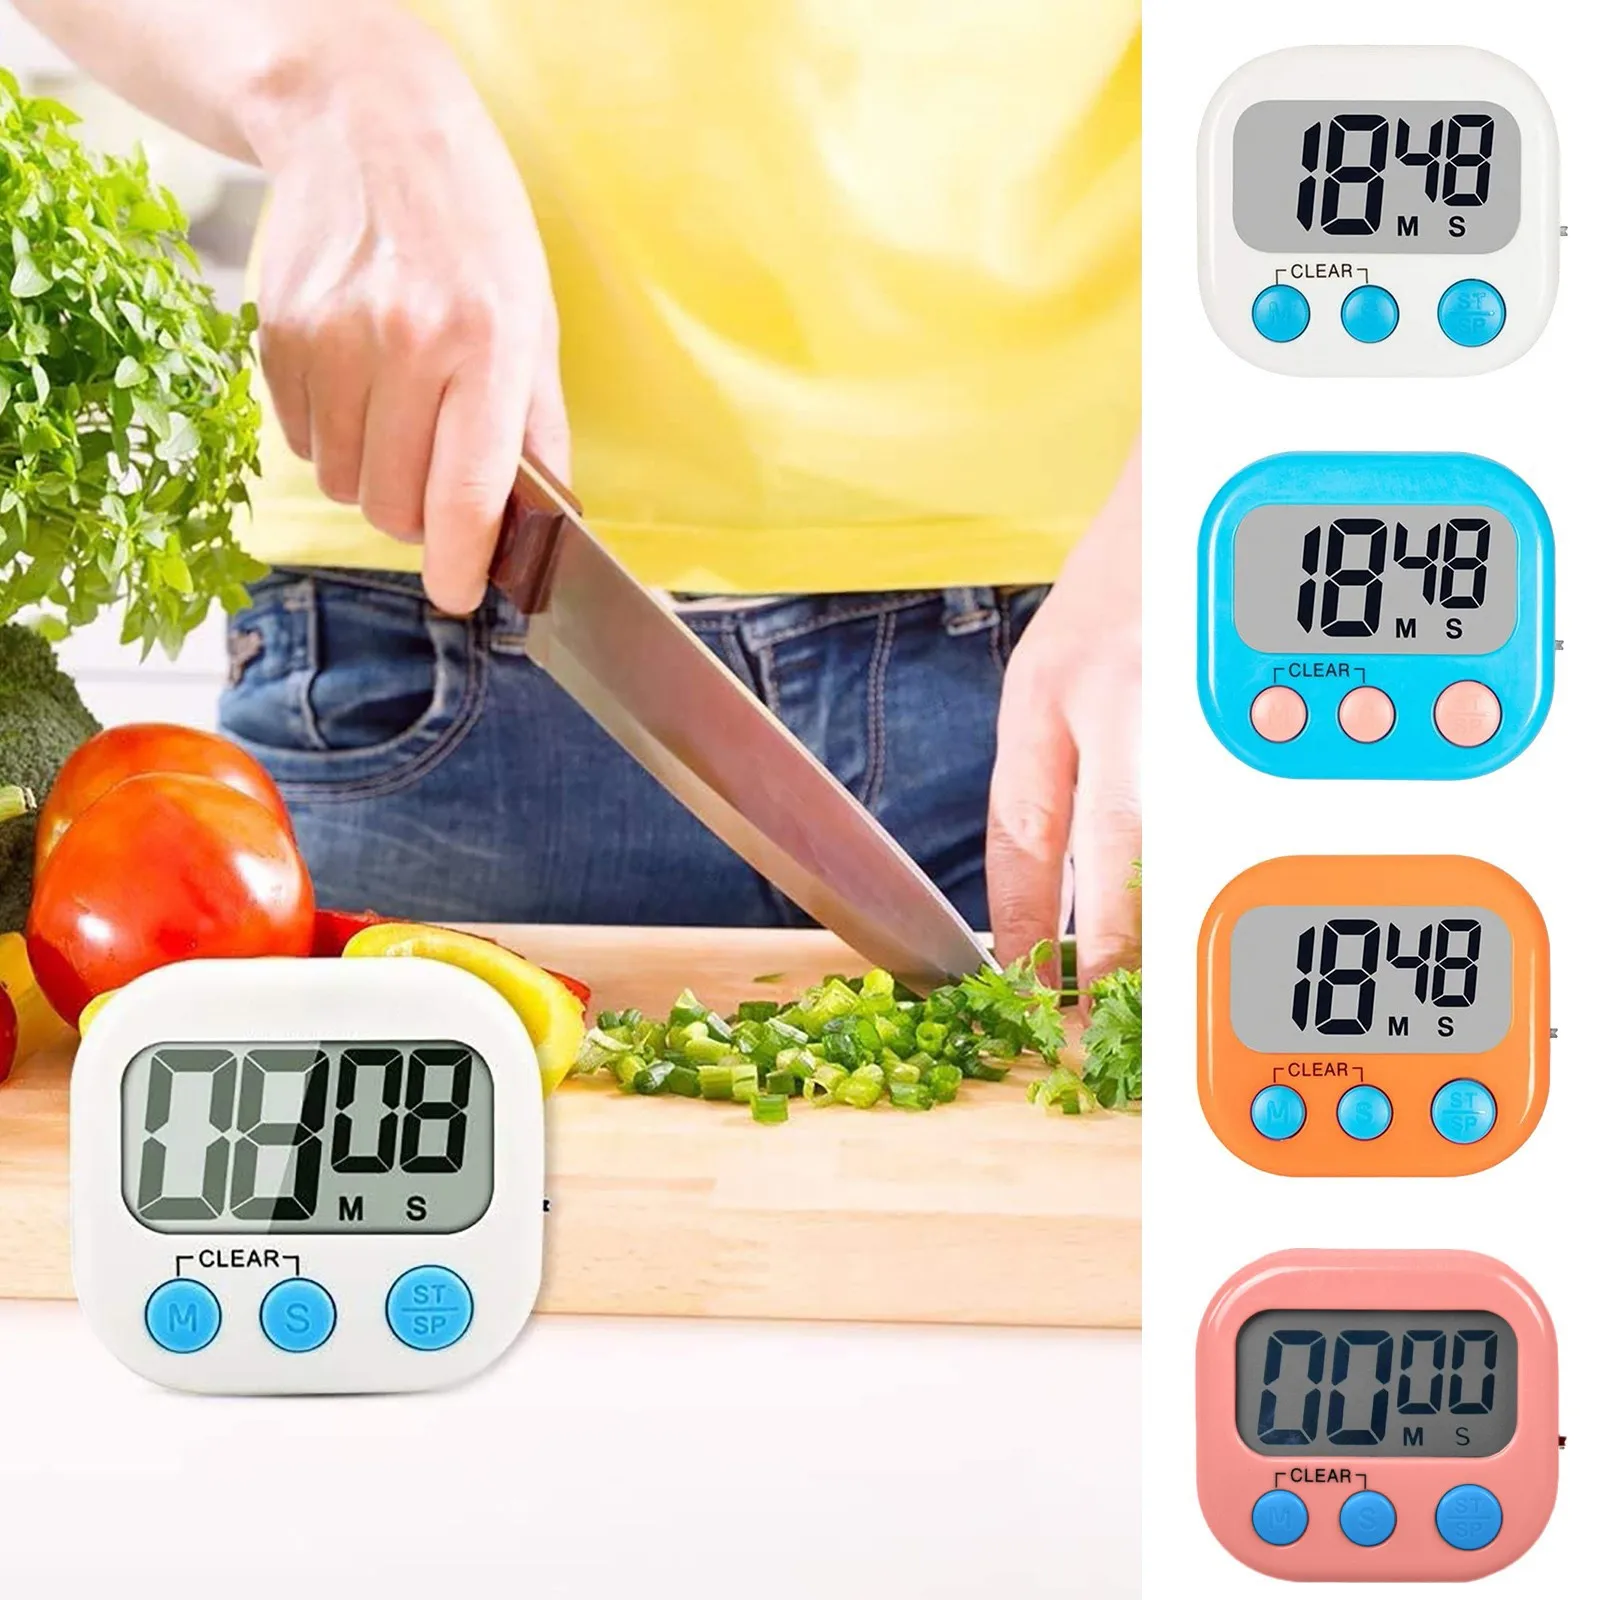 https://ae01.alicdn.com/kf/S4904f69022c446279e0eab9786b395a9o/Digital-Kitchen-Timer-Classroom-Timers-For-Teachers-Kids-Count-Up-Countdown.jpg